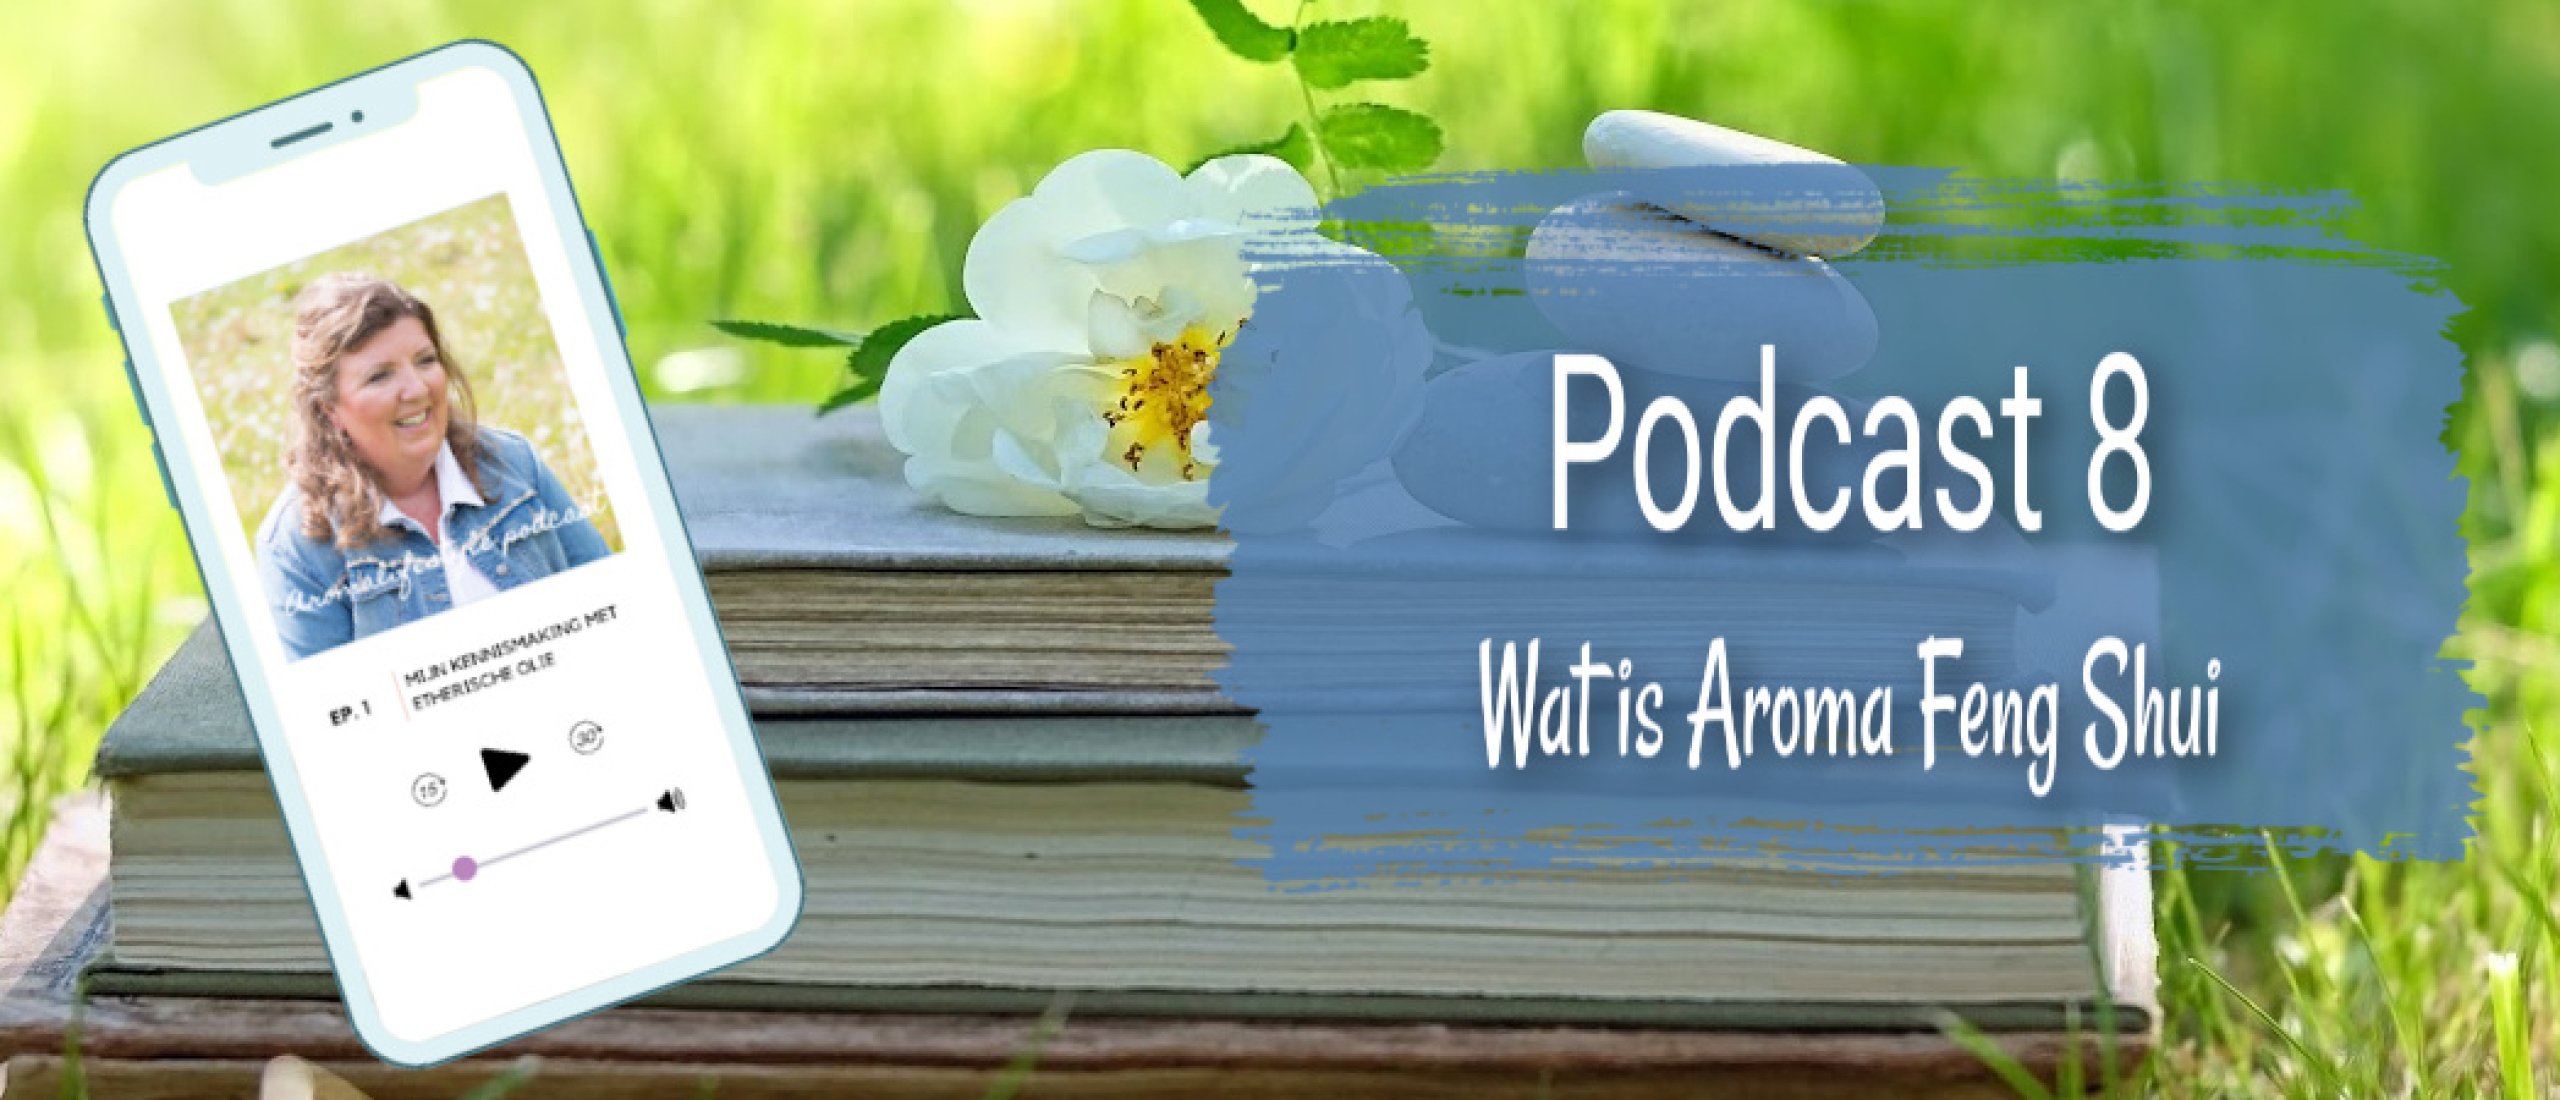 Podcast 8, wat is Aroma Feng Shui